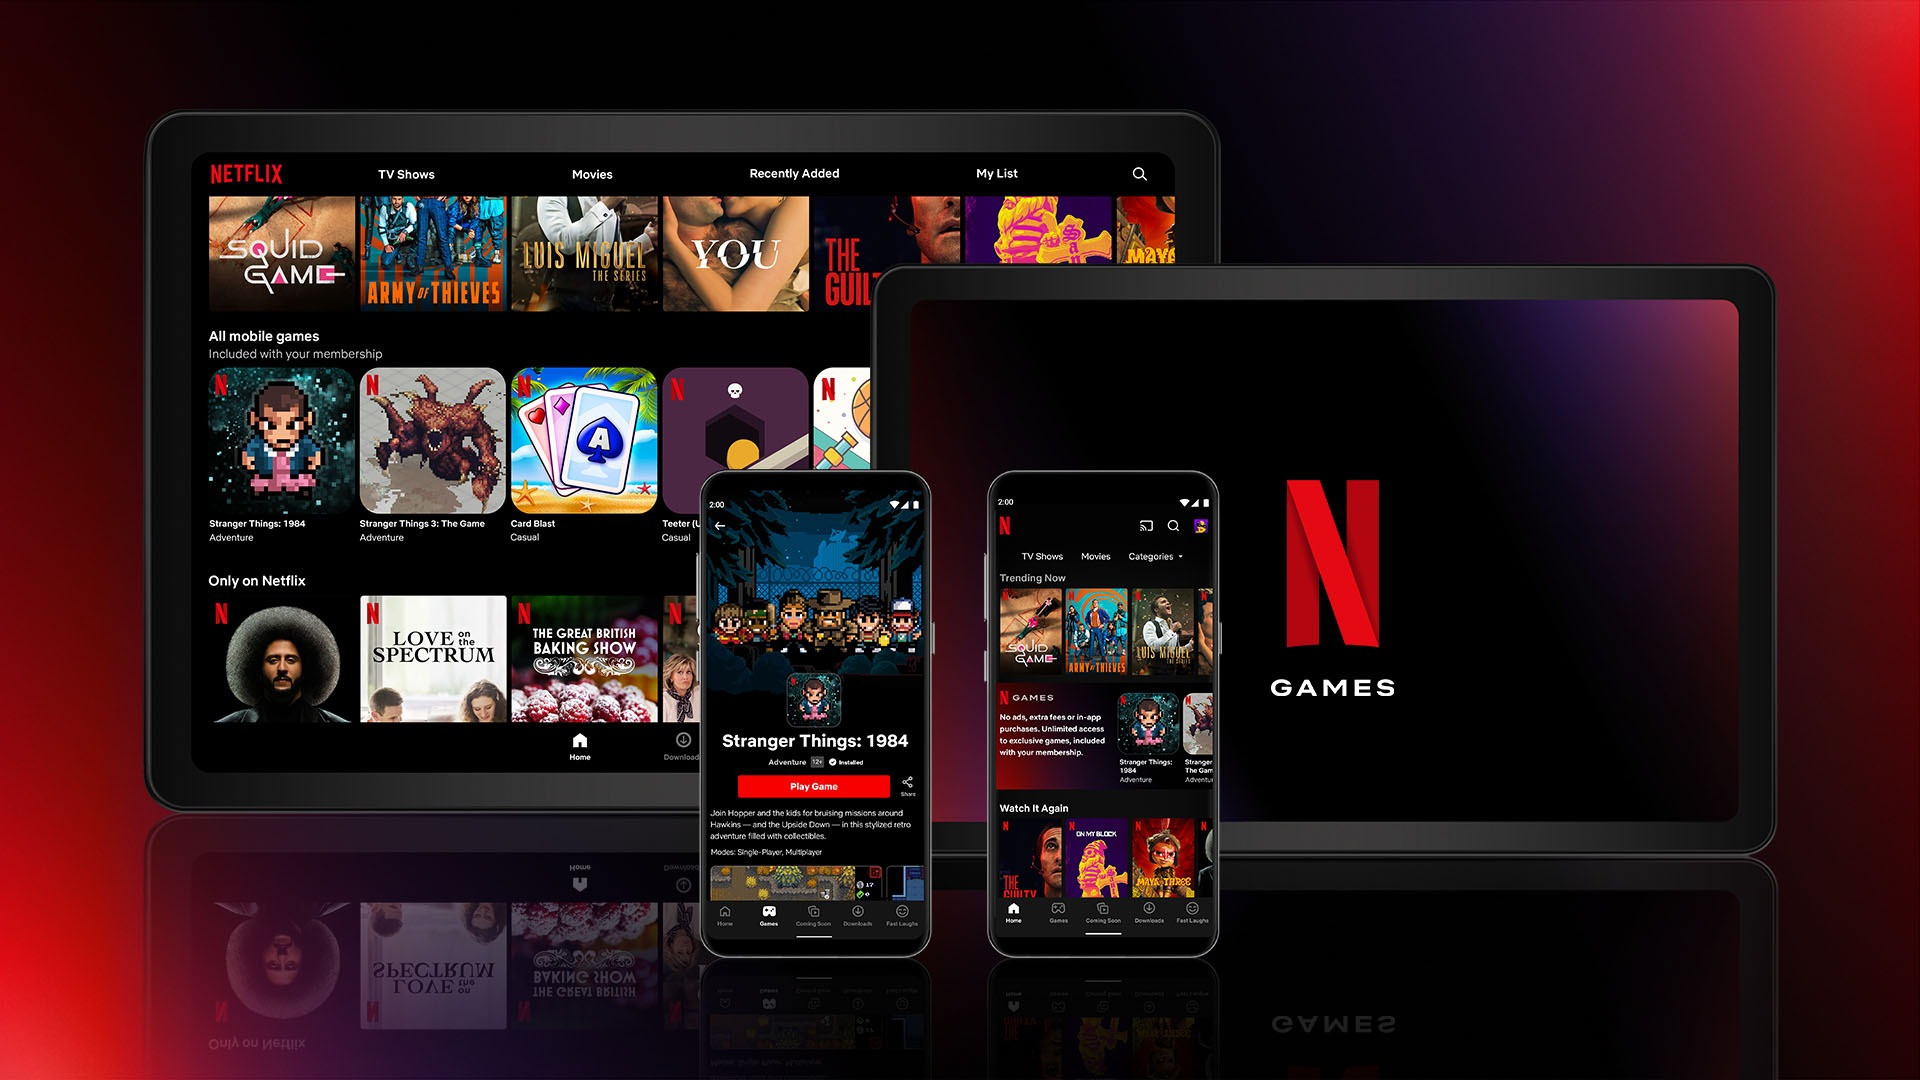 Netflix app is hiding a some great games